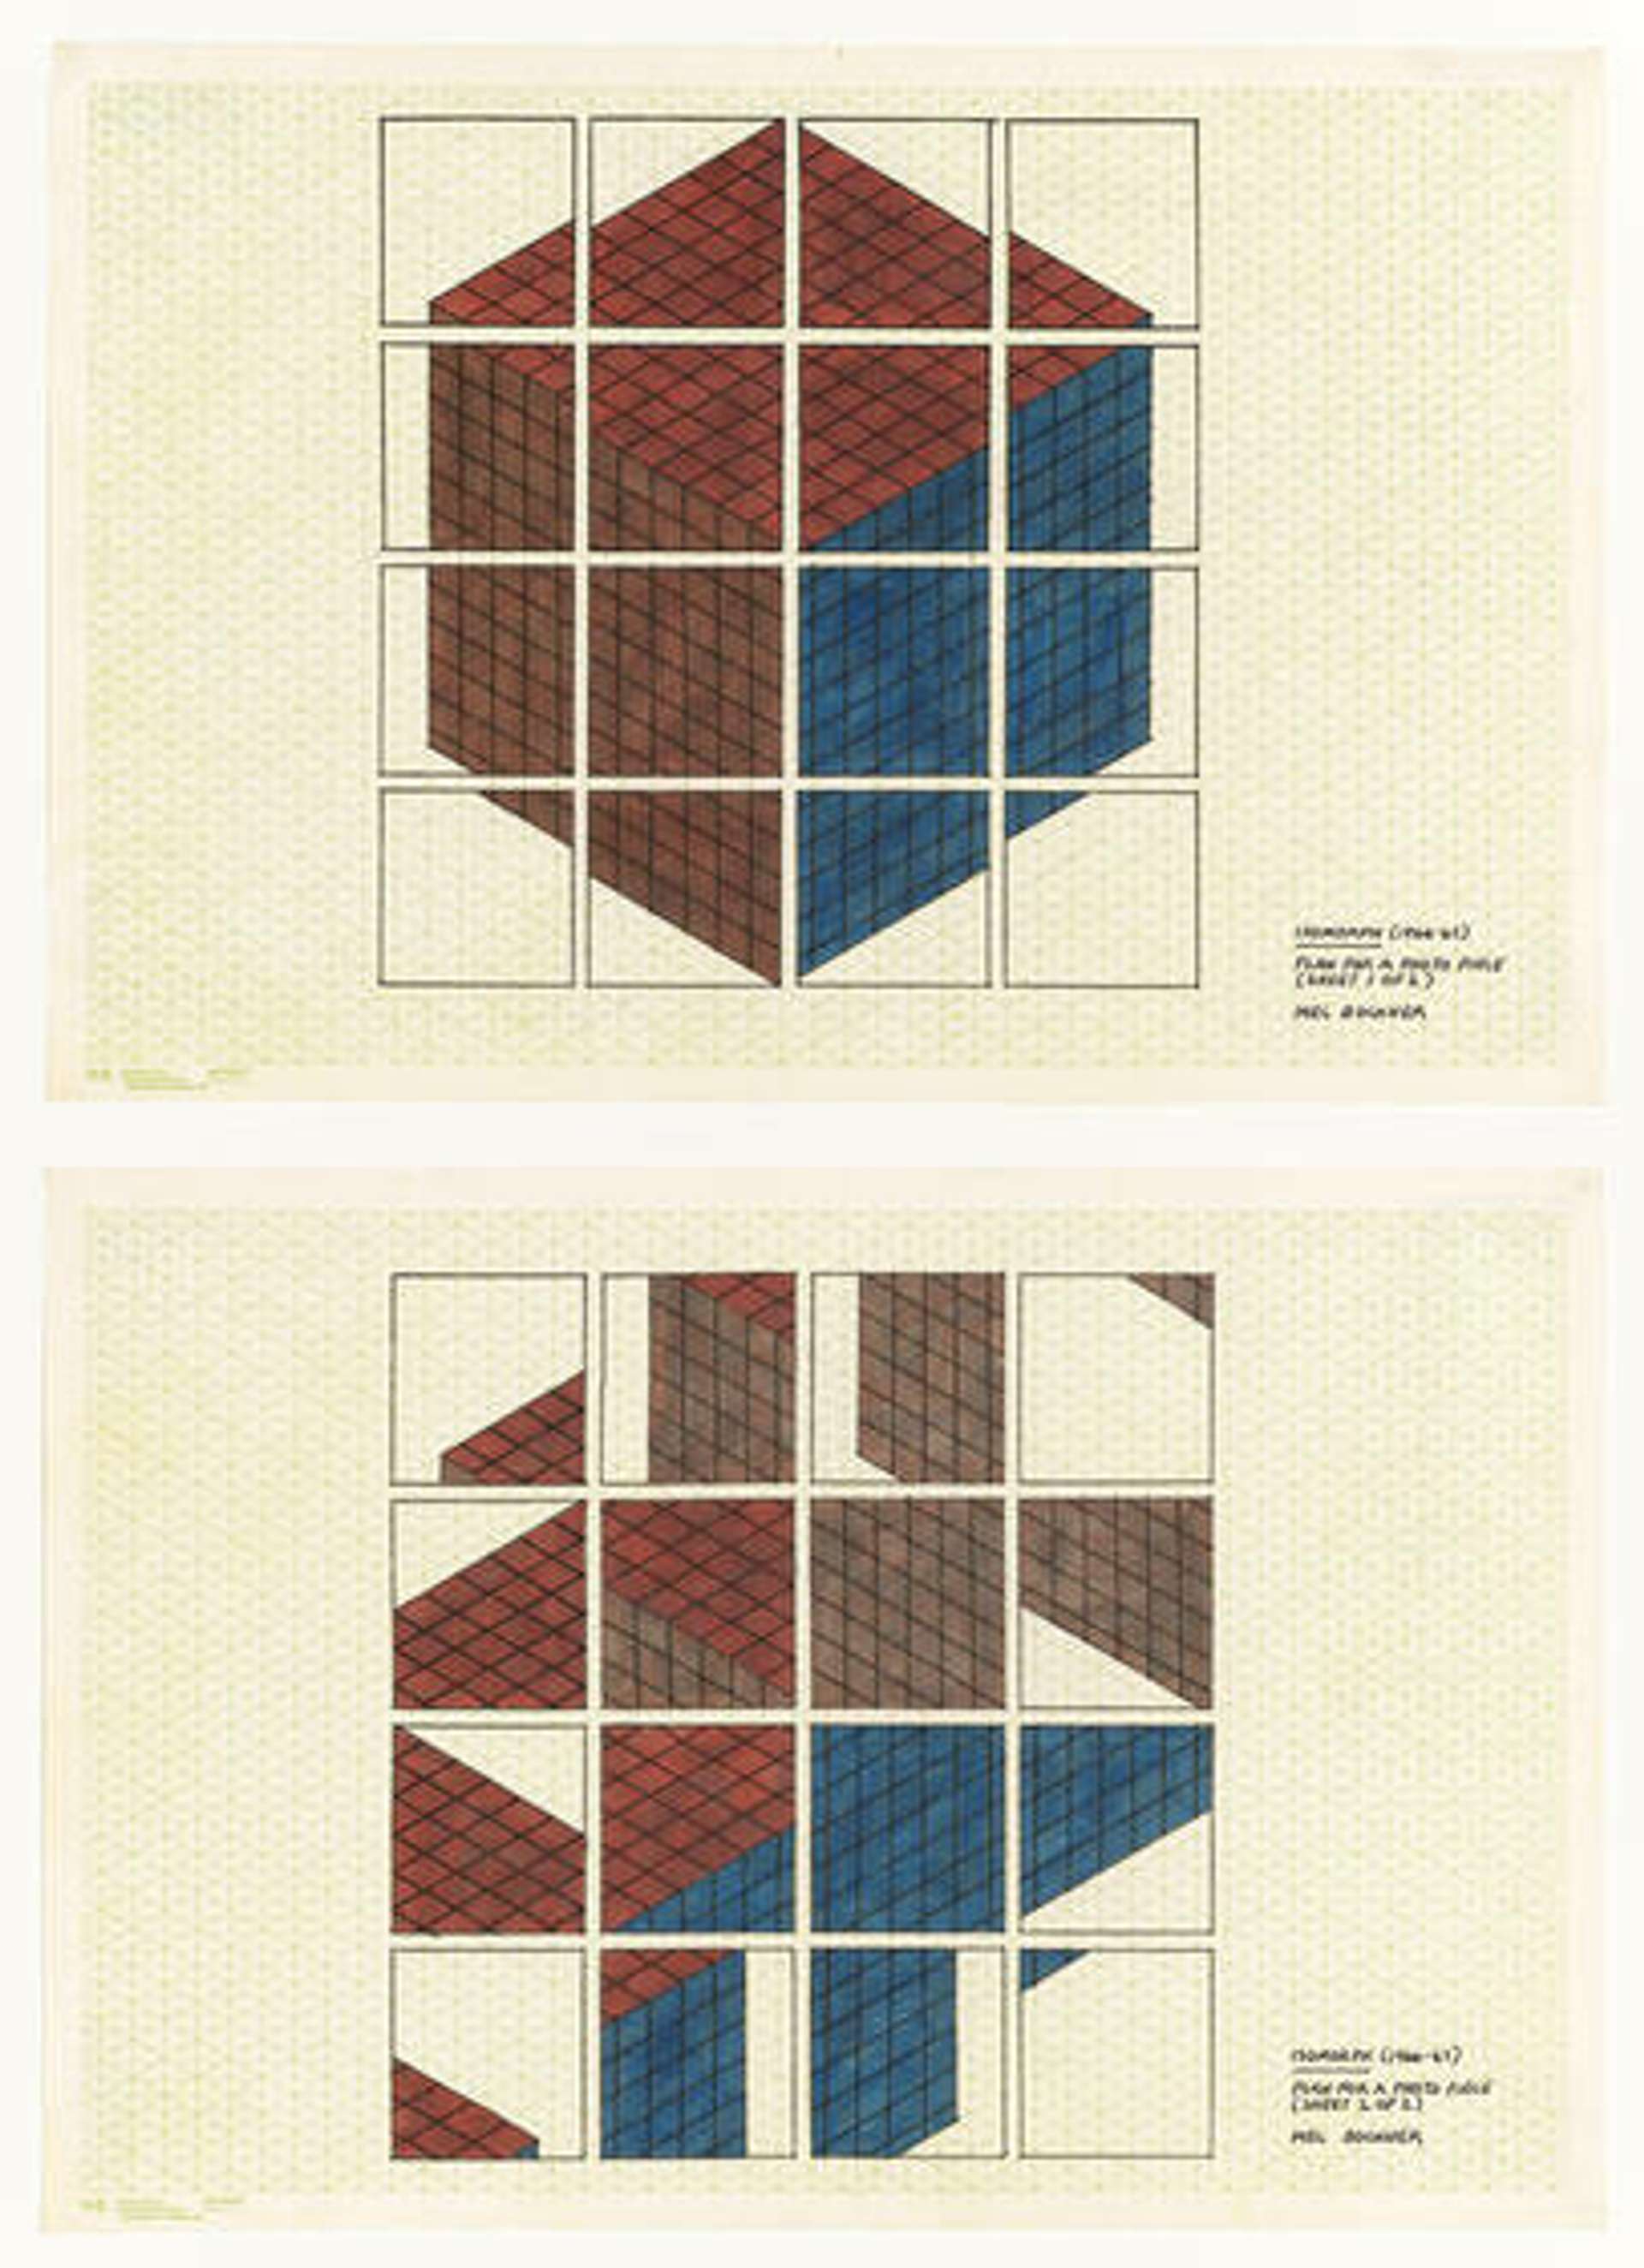 Two conceptual artworks on paper depicting a three-dimensional cube with different surface colors. The first artwork shows the cube broken apart by eight smaller squares, while the second artwork rearranges the identifying surfaces into a puzzle-like format.